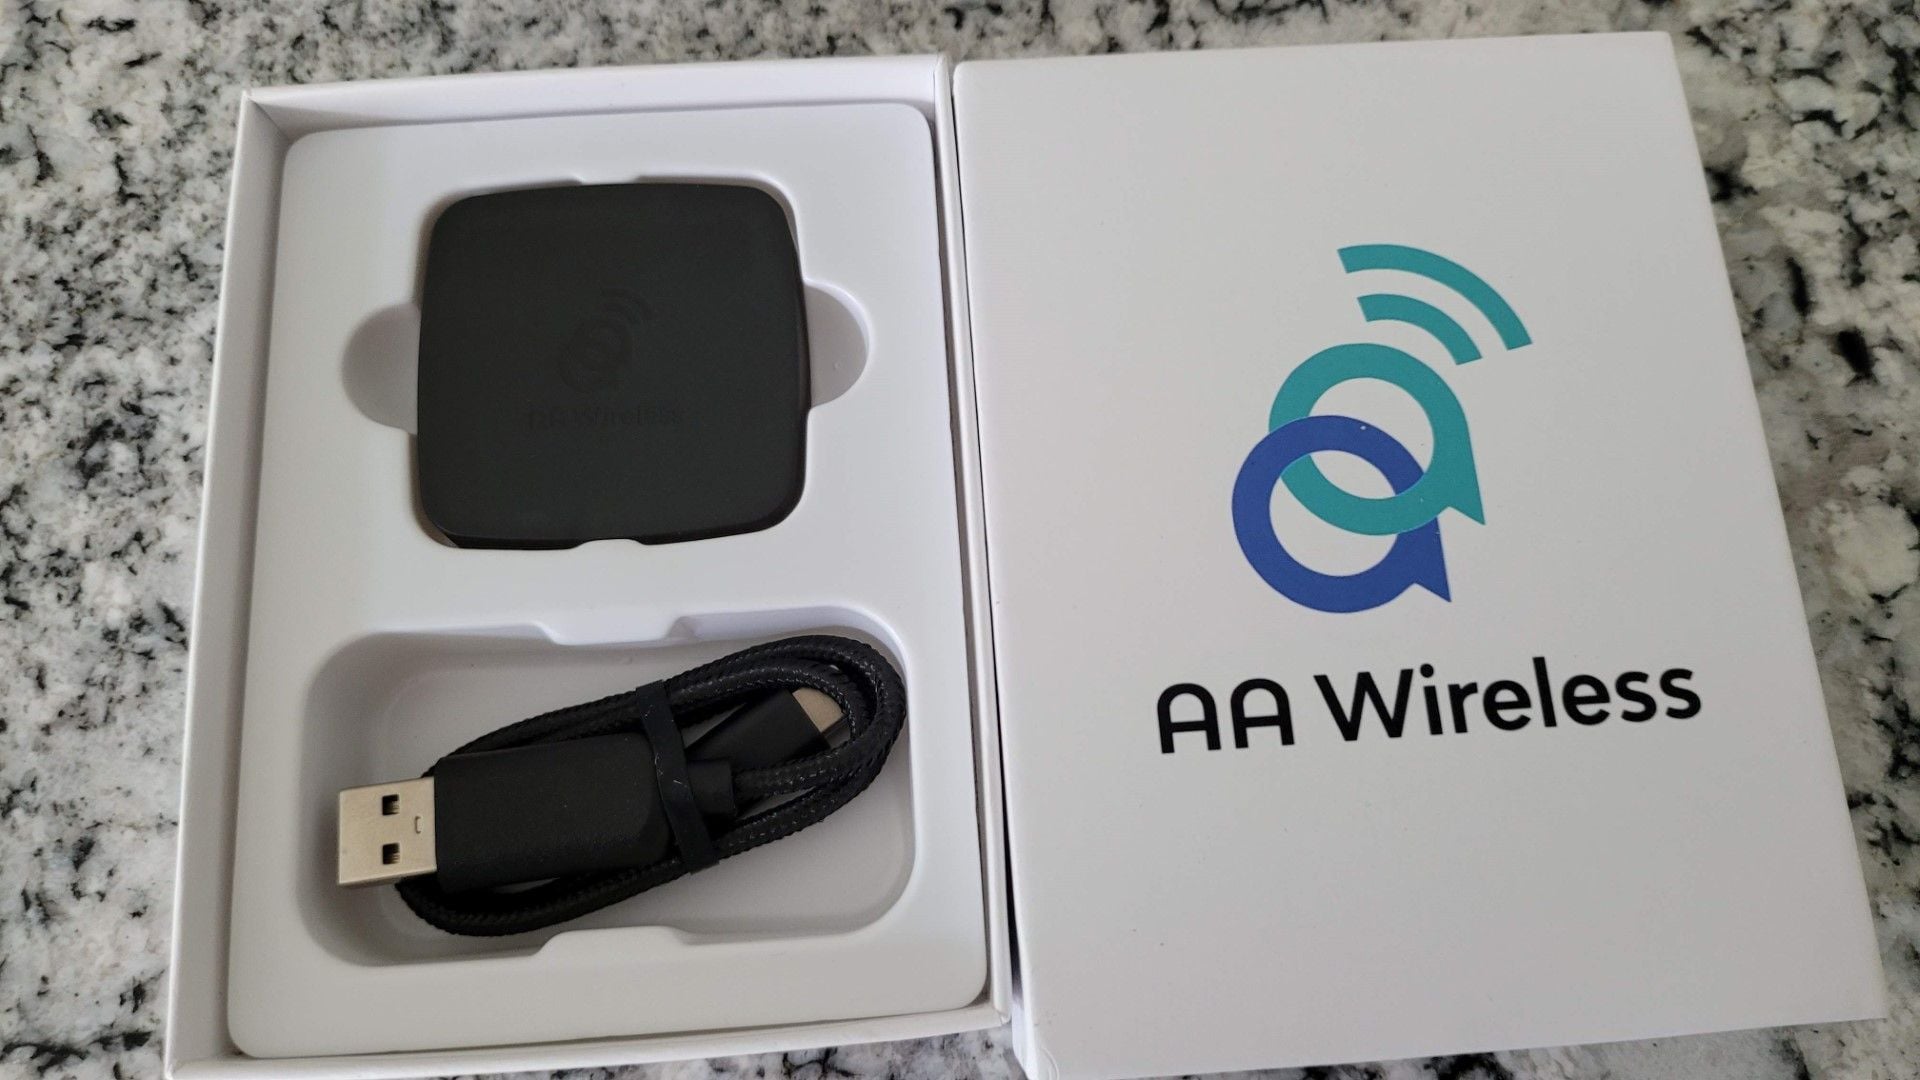 AAWireless - Bring wireless Android Auto connection to your car